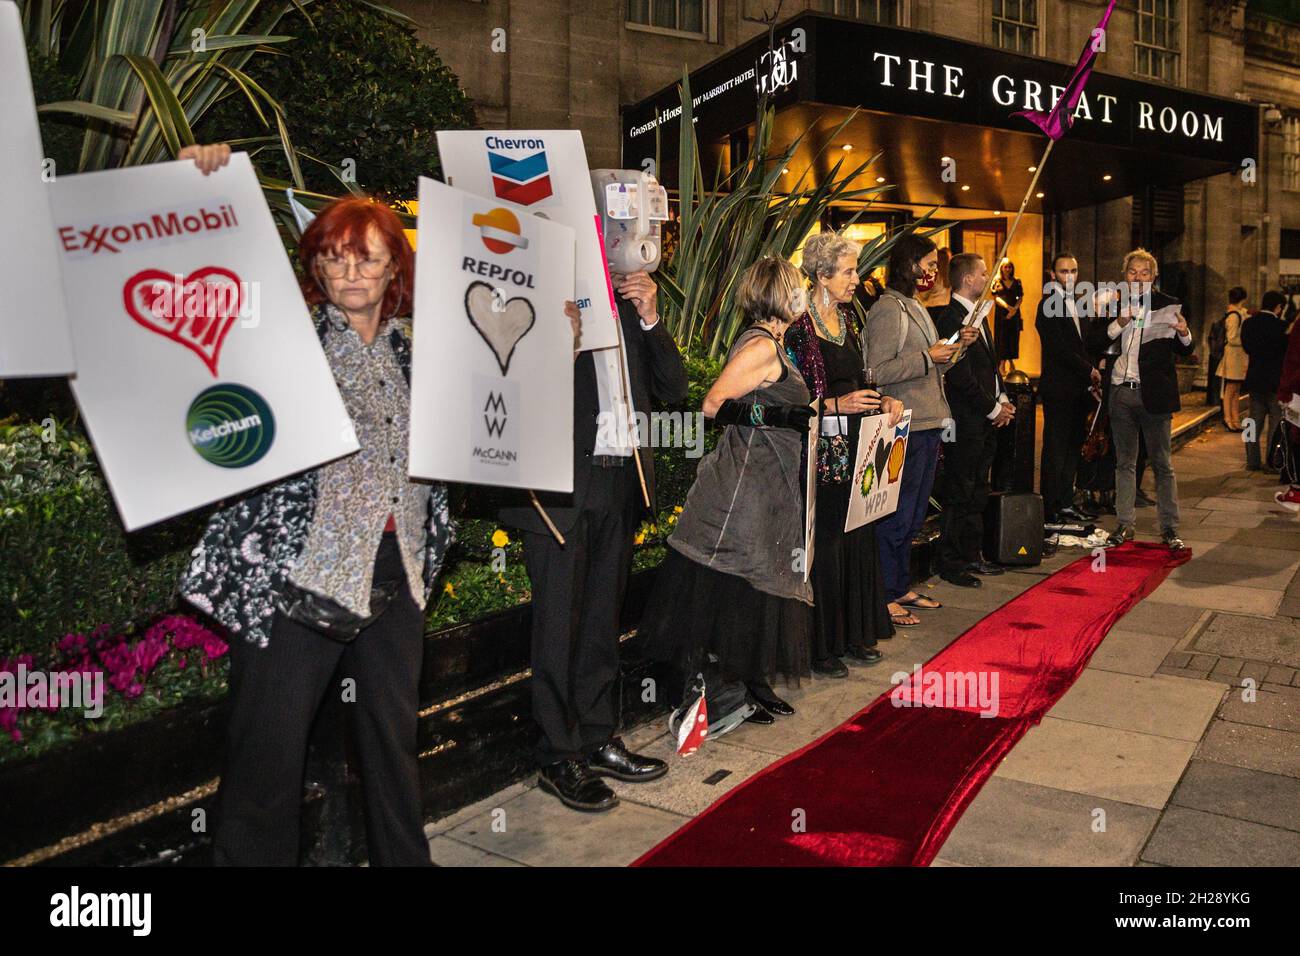 Park Lane, London, UK. 20th Oct, 2021. Activists from XR Exctinction Rebellion Greenwash protest outside the PR Week Awards at Grosvenor House this eve. The protesters, in eveningwear, have brought their own red carpet to award the 'Greenwashers in Chief' and rally against PR firms who work for fossil fuel companies. Credit: Imageplotter/Alamy Live News Stock Photo